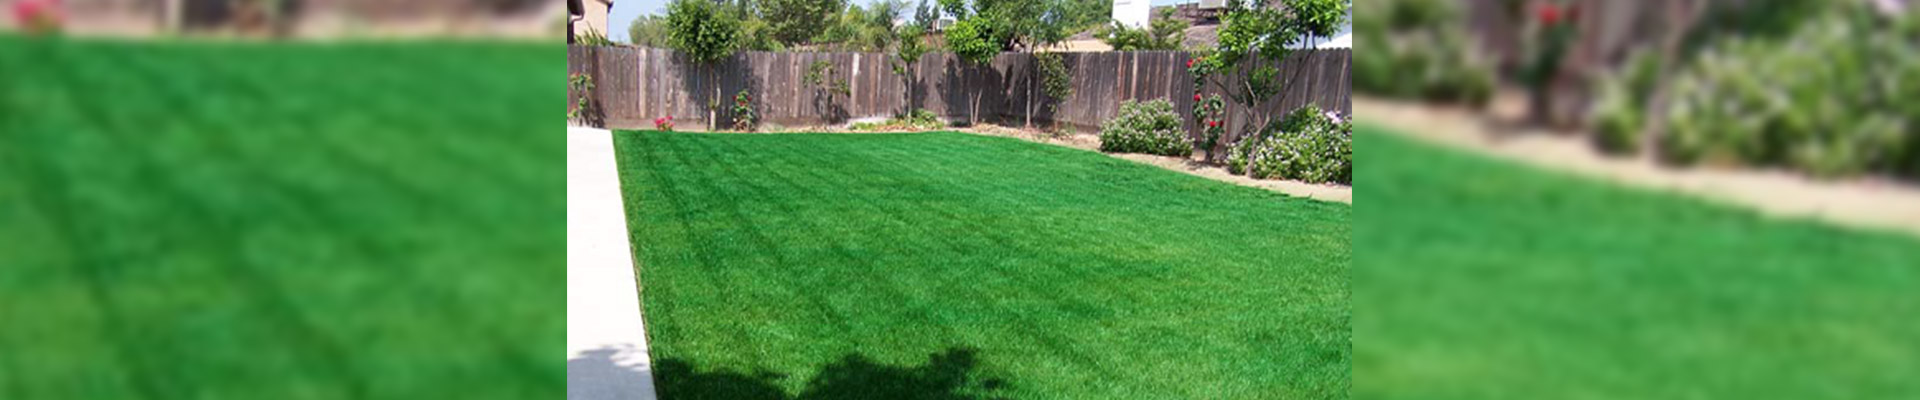 Dry or yellow grass, dry or yellowed lawn, save water, paint